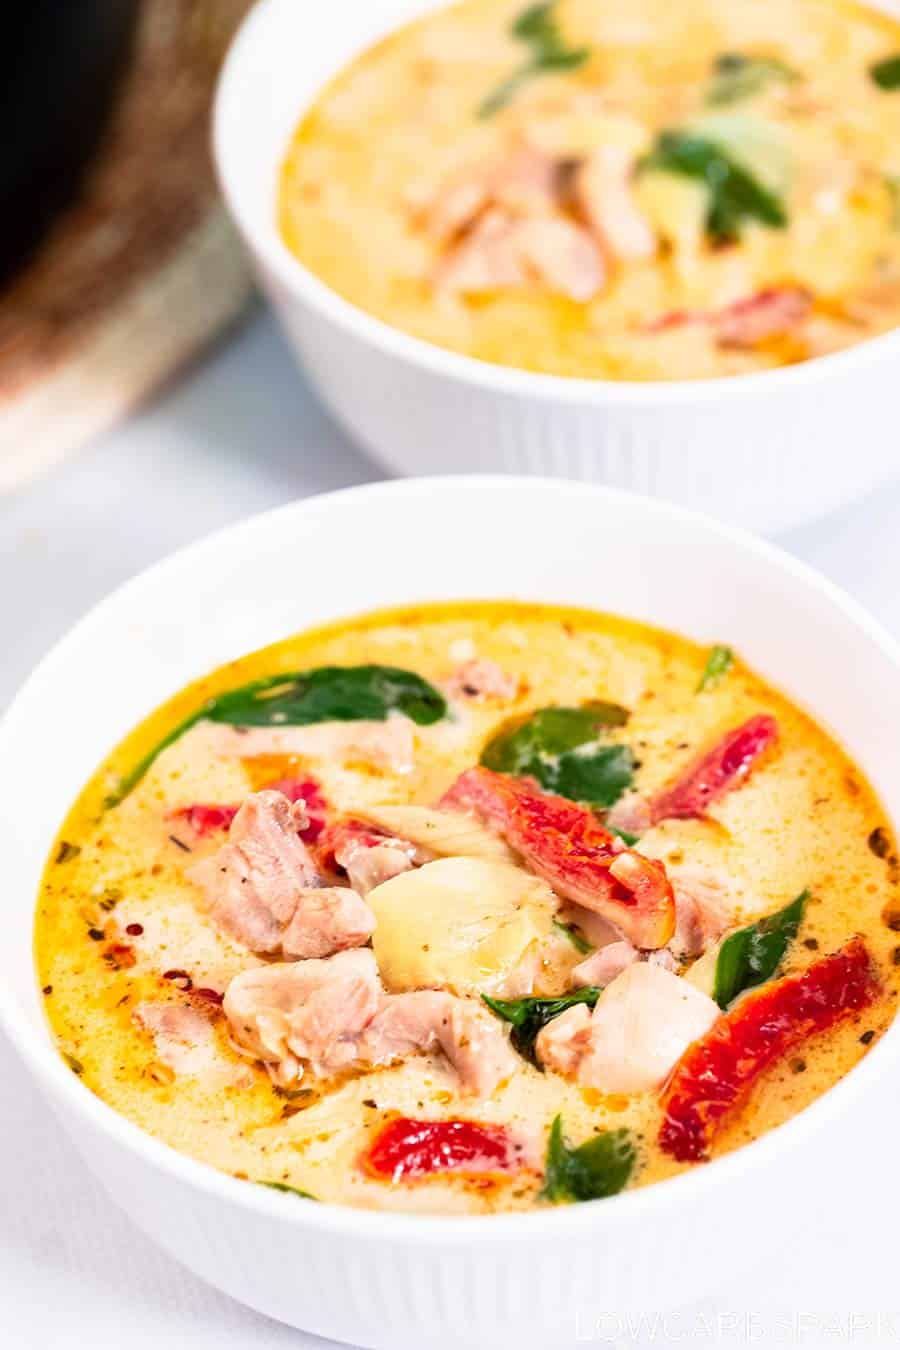 https://www.lowcarbspark.com/wp-content/uploads/2022/10/Tuscan-Chicken-Soup-Ingredients-3.jpg